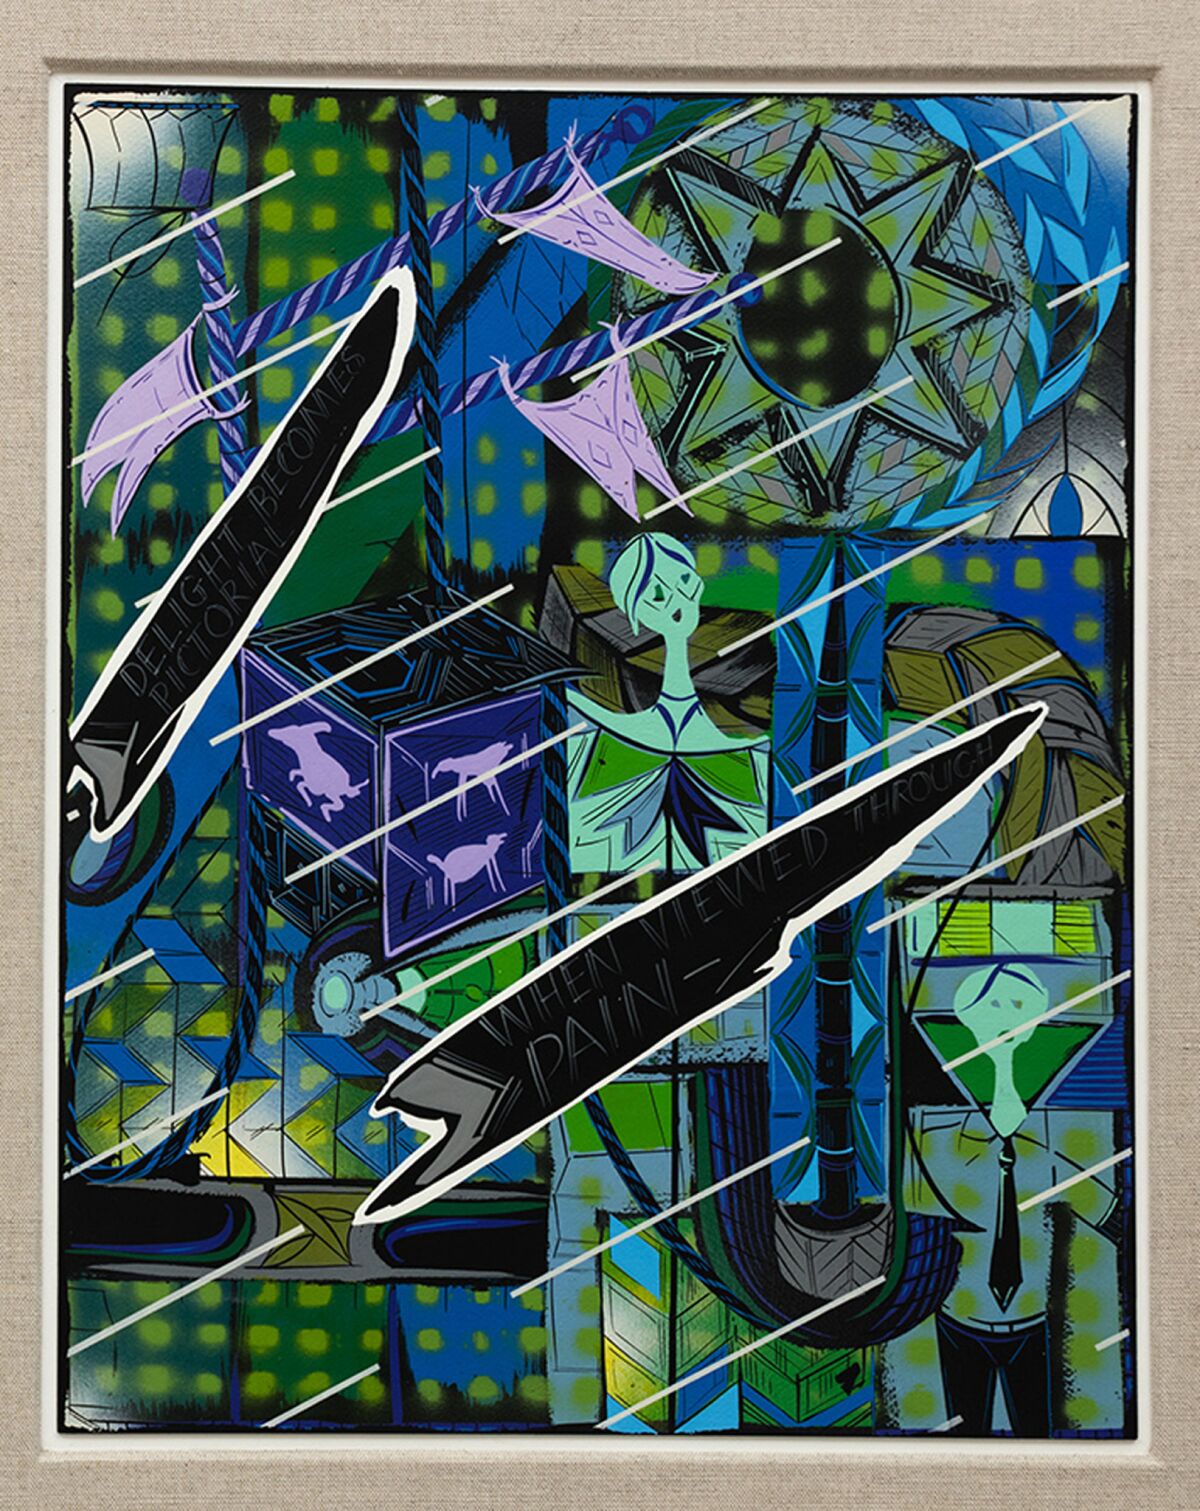 Lari Pittman's "10 Divinations by Emily Dickinson in Greens and Blues," 2015, acrylic and lacquer spray over gessoed, heavyweight paper board, 27 inches by 25 inches by 4 1/2 inches. (Lari Pittman, courtesy of Beth Rudin DeWoody / Huntington Art Collections)